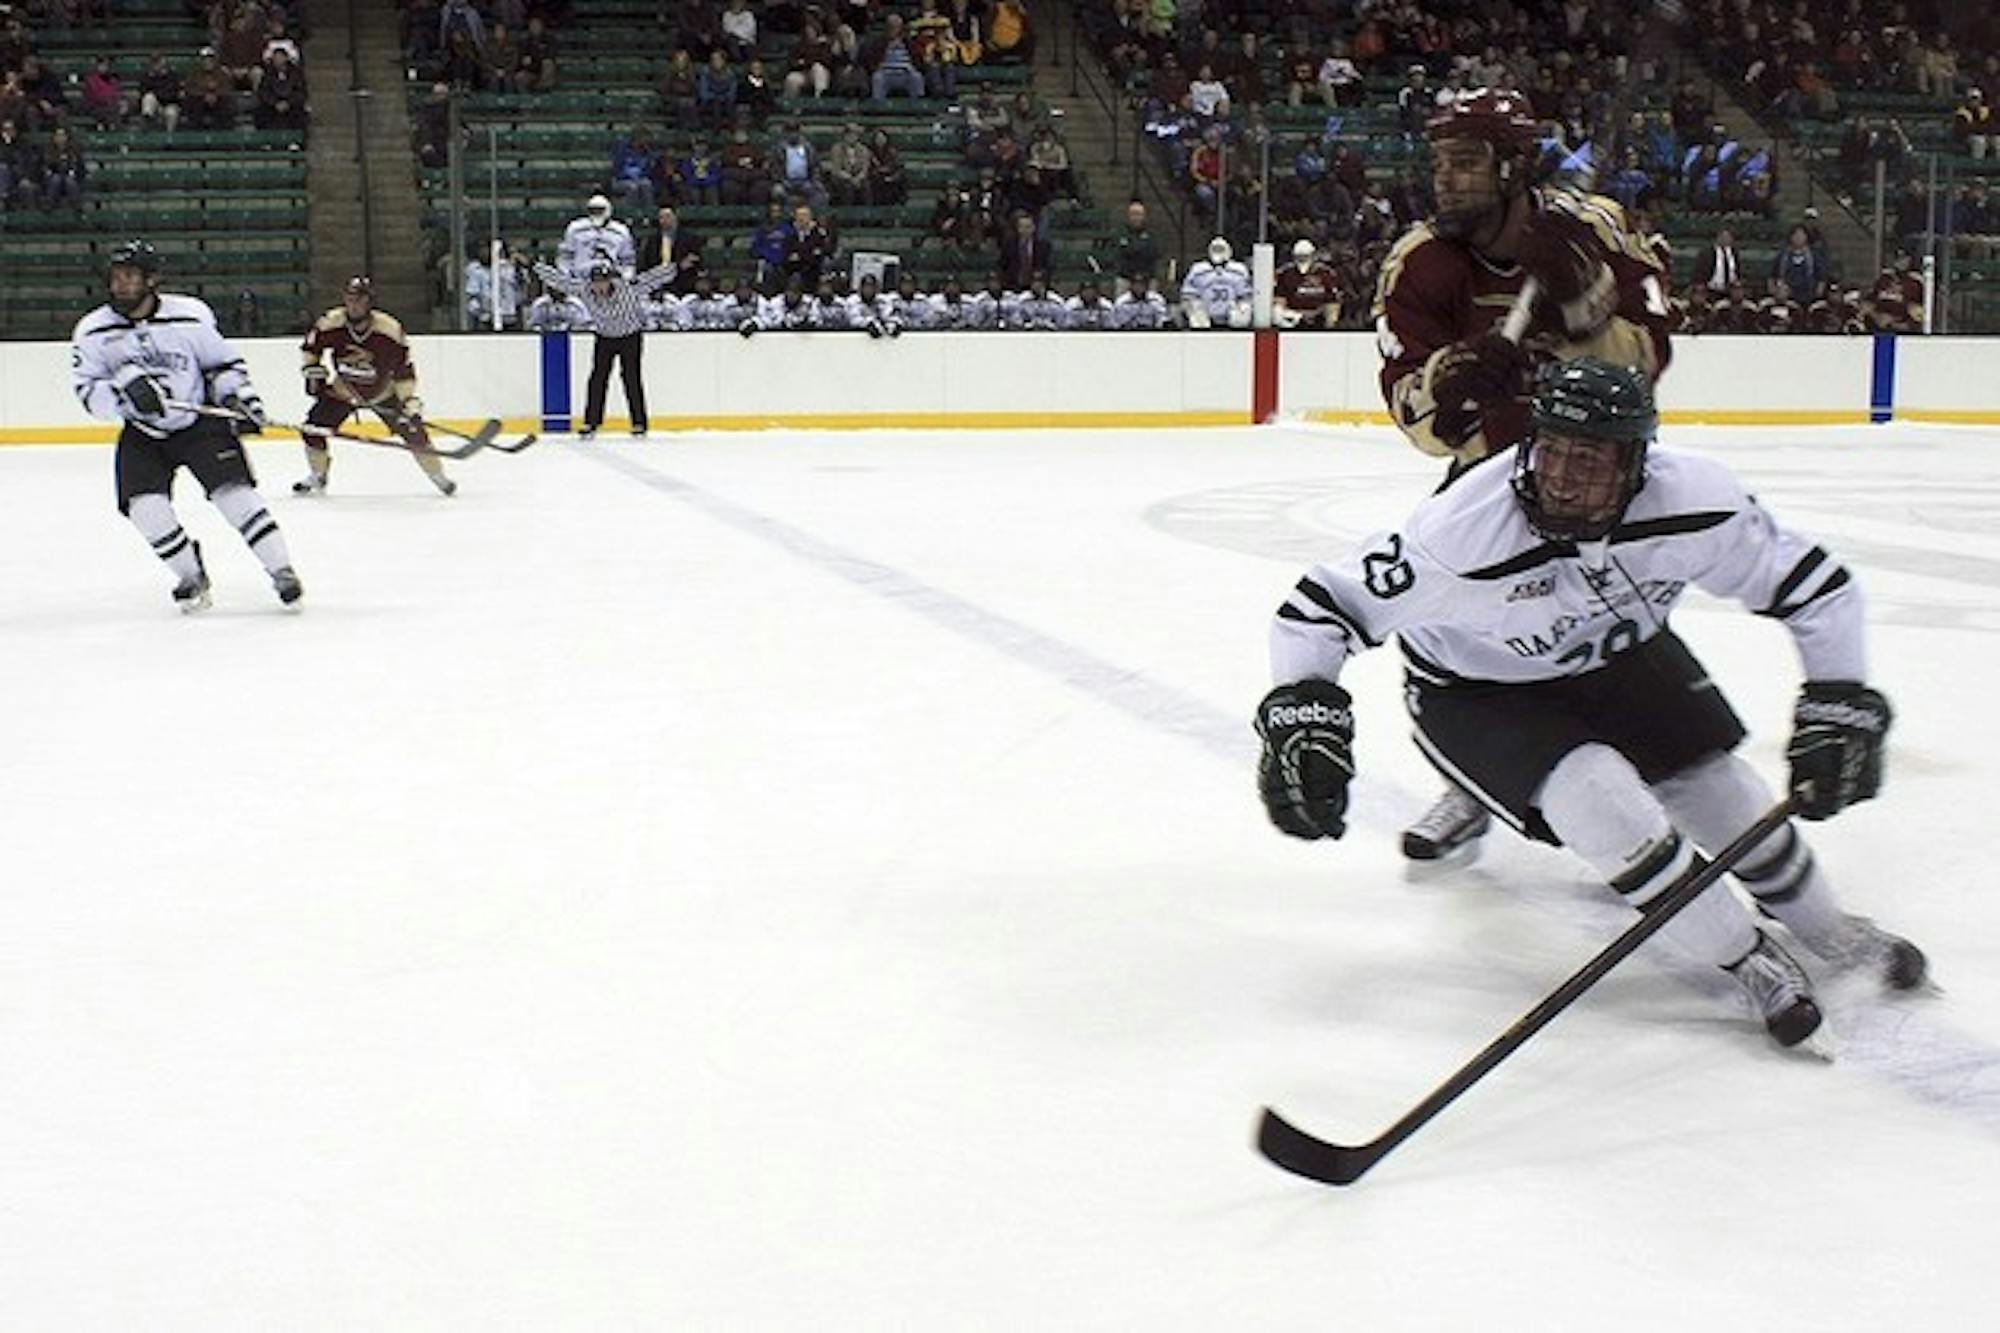 The Dartmouth men's hockey team defeated Yale University for the first time since February 2008 with a shootout win against the Bulldogs on Friday.